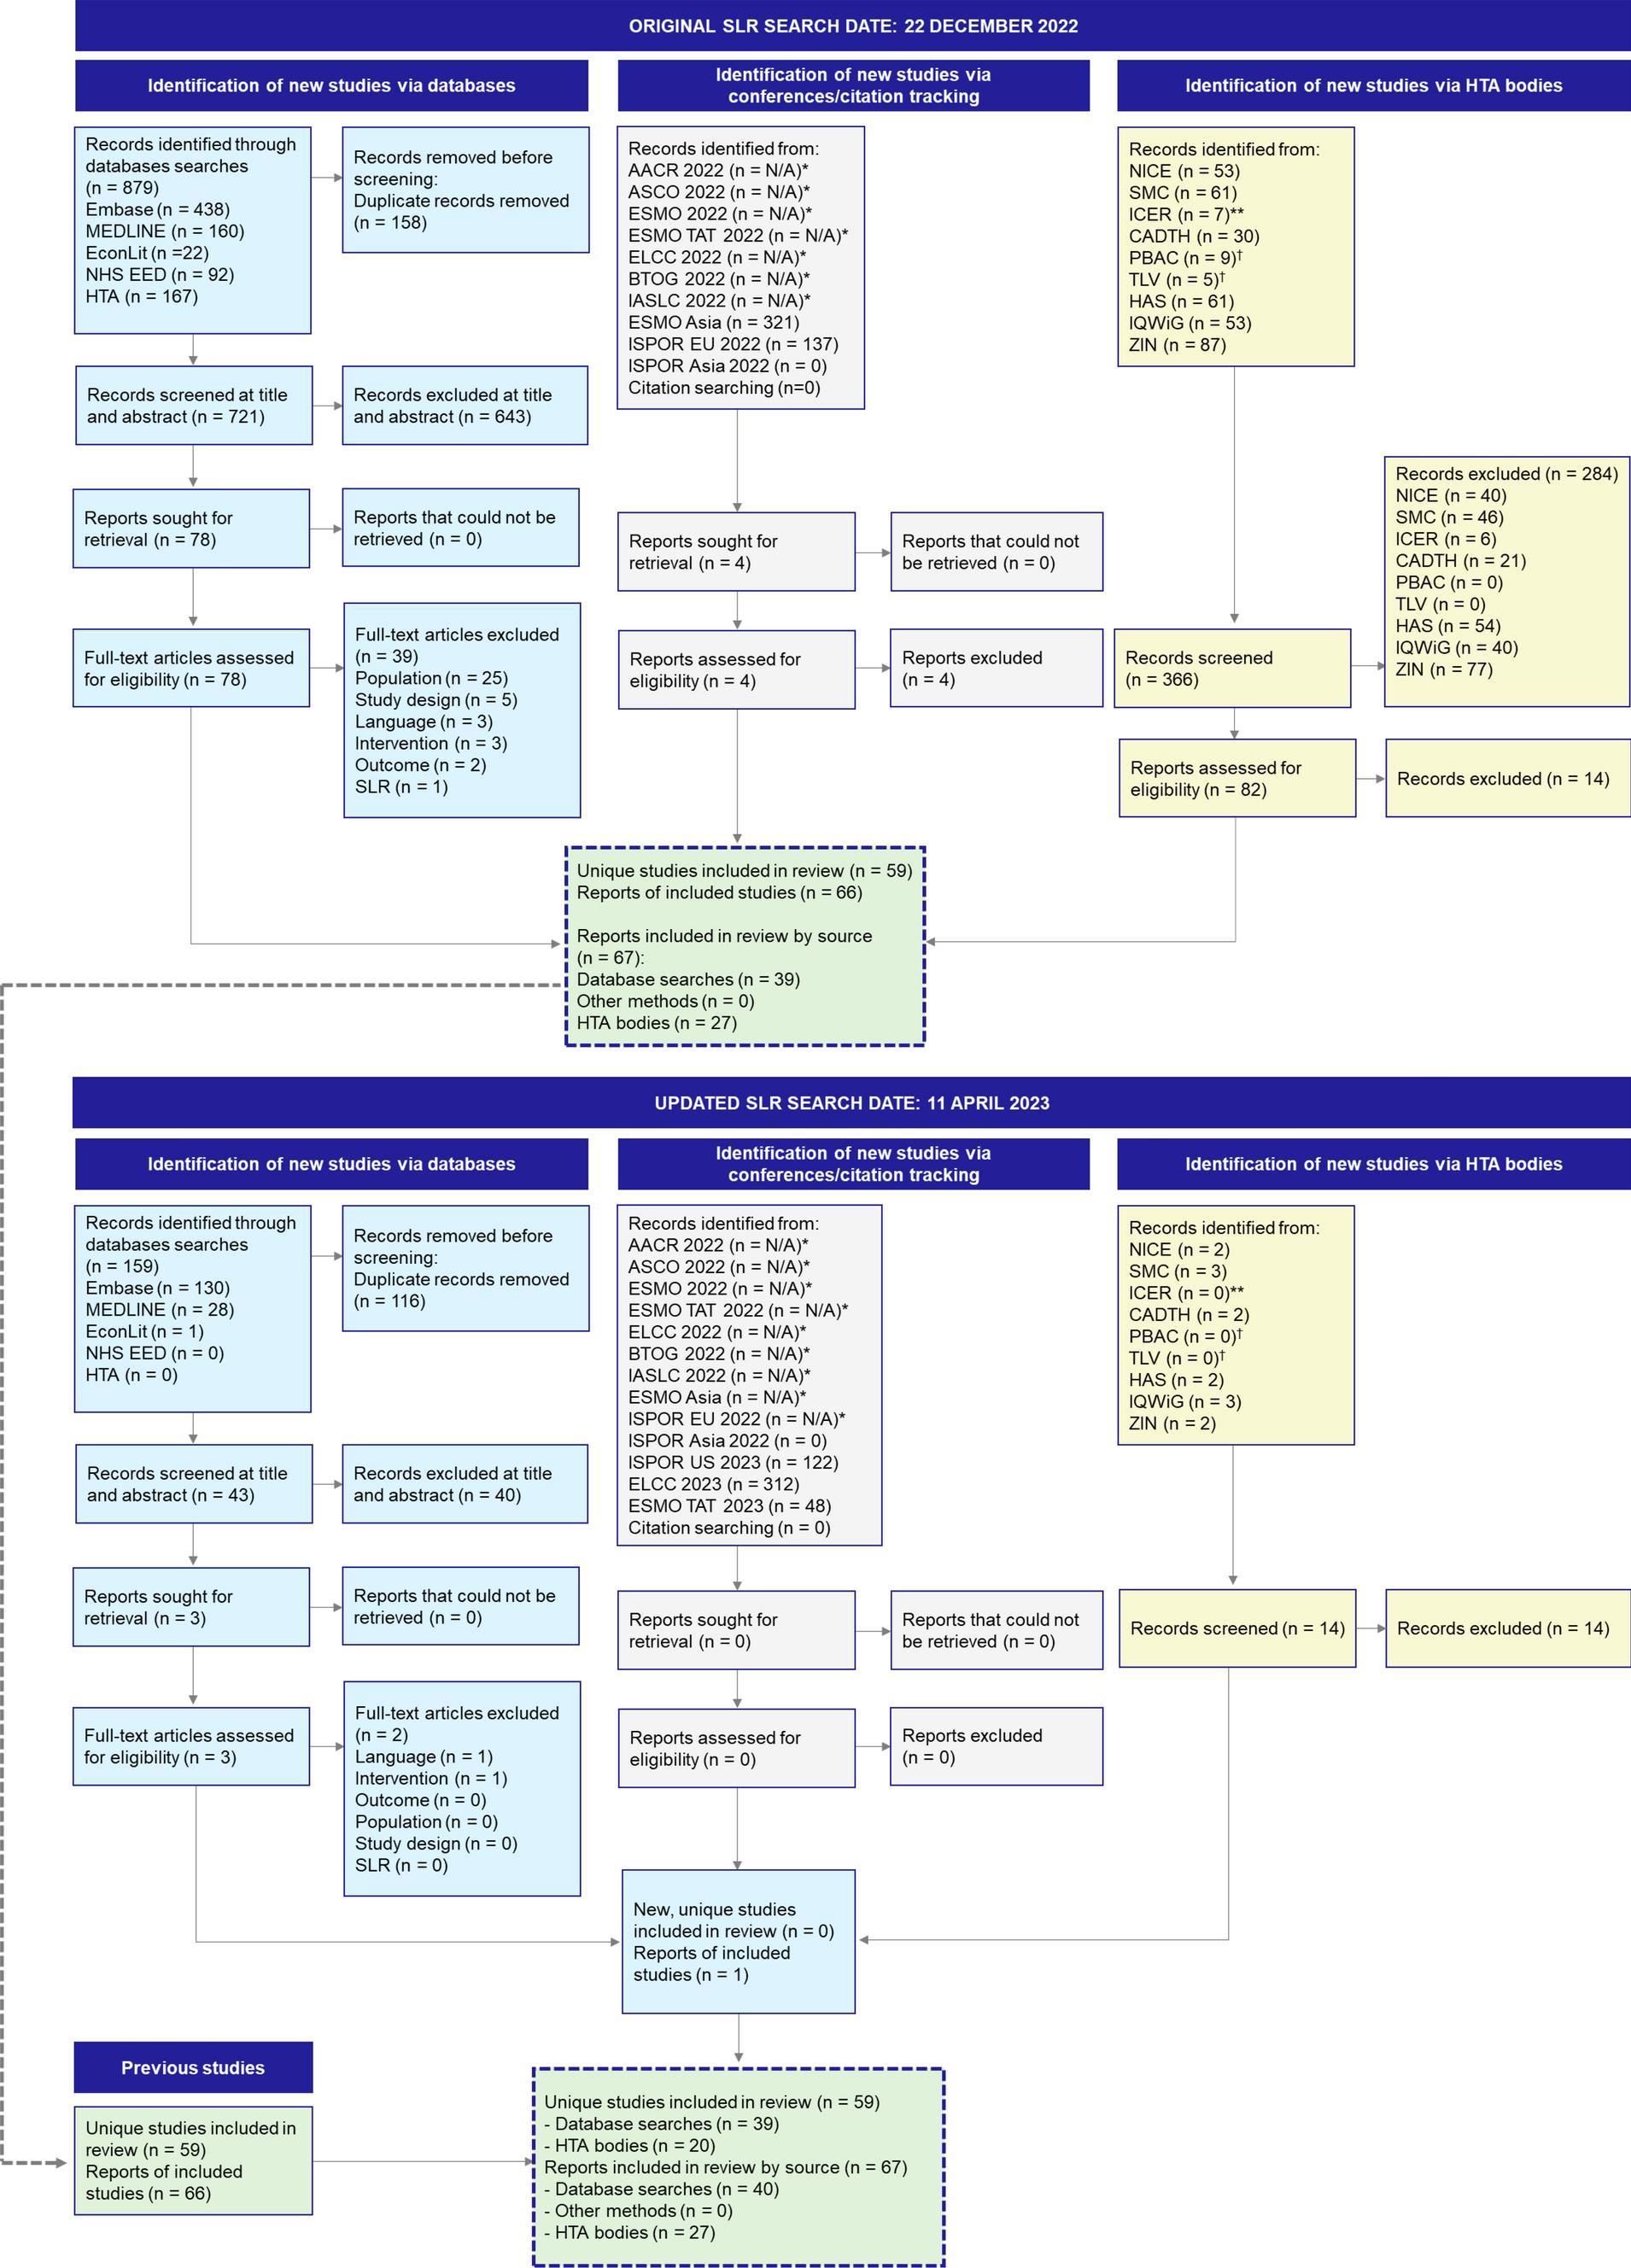 Critical Examination of Modeling Approaches Used in Economic Evaluations of First-Line Treatments for Locally Advanced or Metastatic Non-Small Cell Lung Cancer Harboring Epidermal Growth Factor Receptor Mutations: A Systematic Literature Review